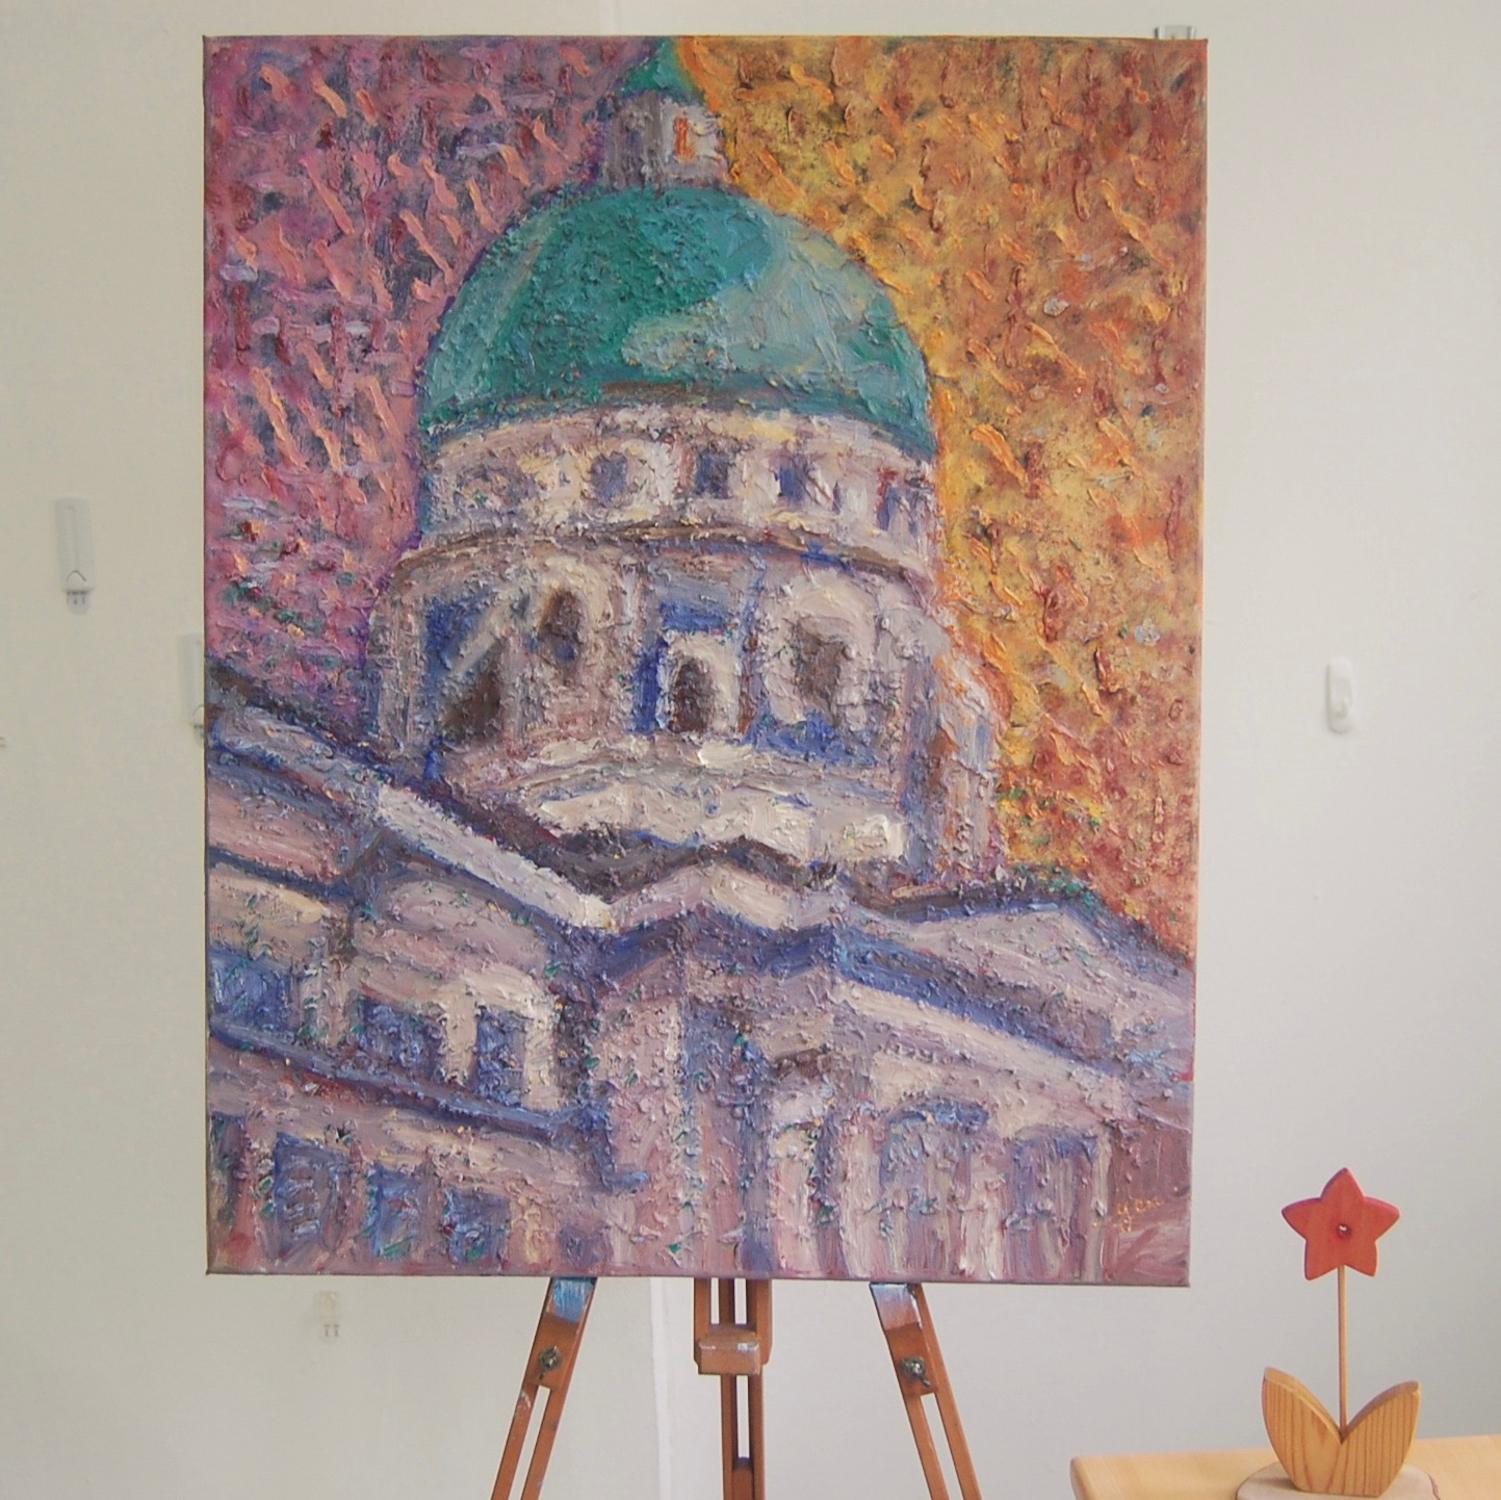 Silent Dome: Bright Impressionist Oil Painting - Singapore National Gallery - Original Architectural Artwork - Contemporary Urban Home Decor